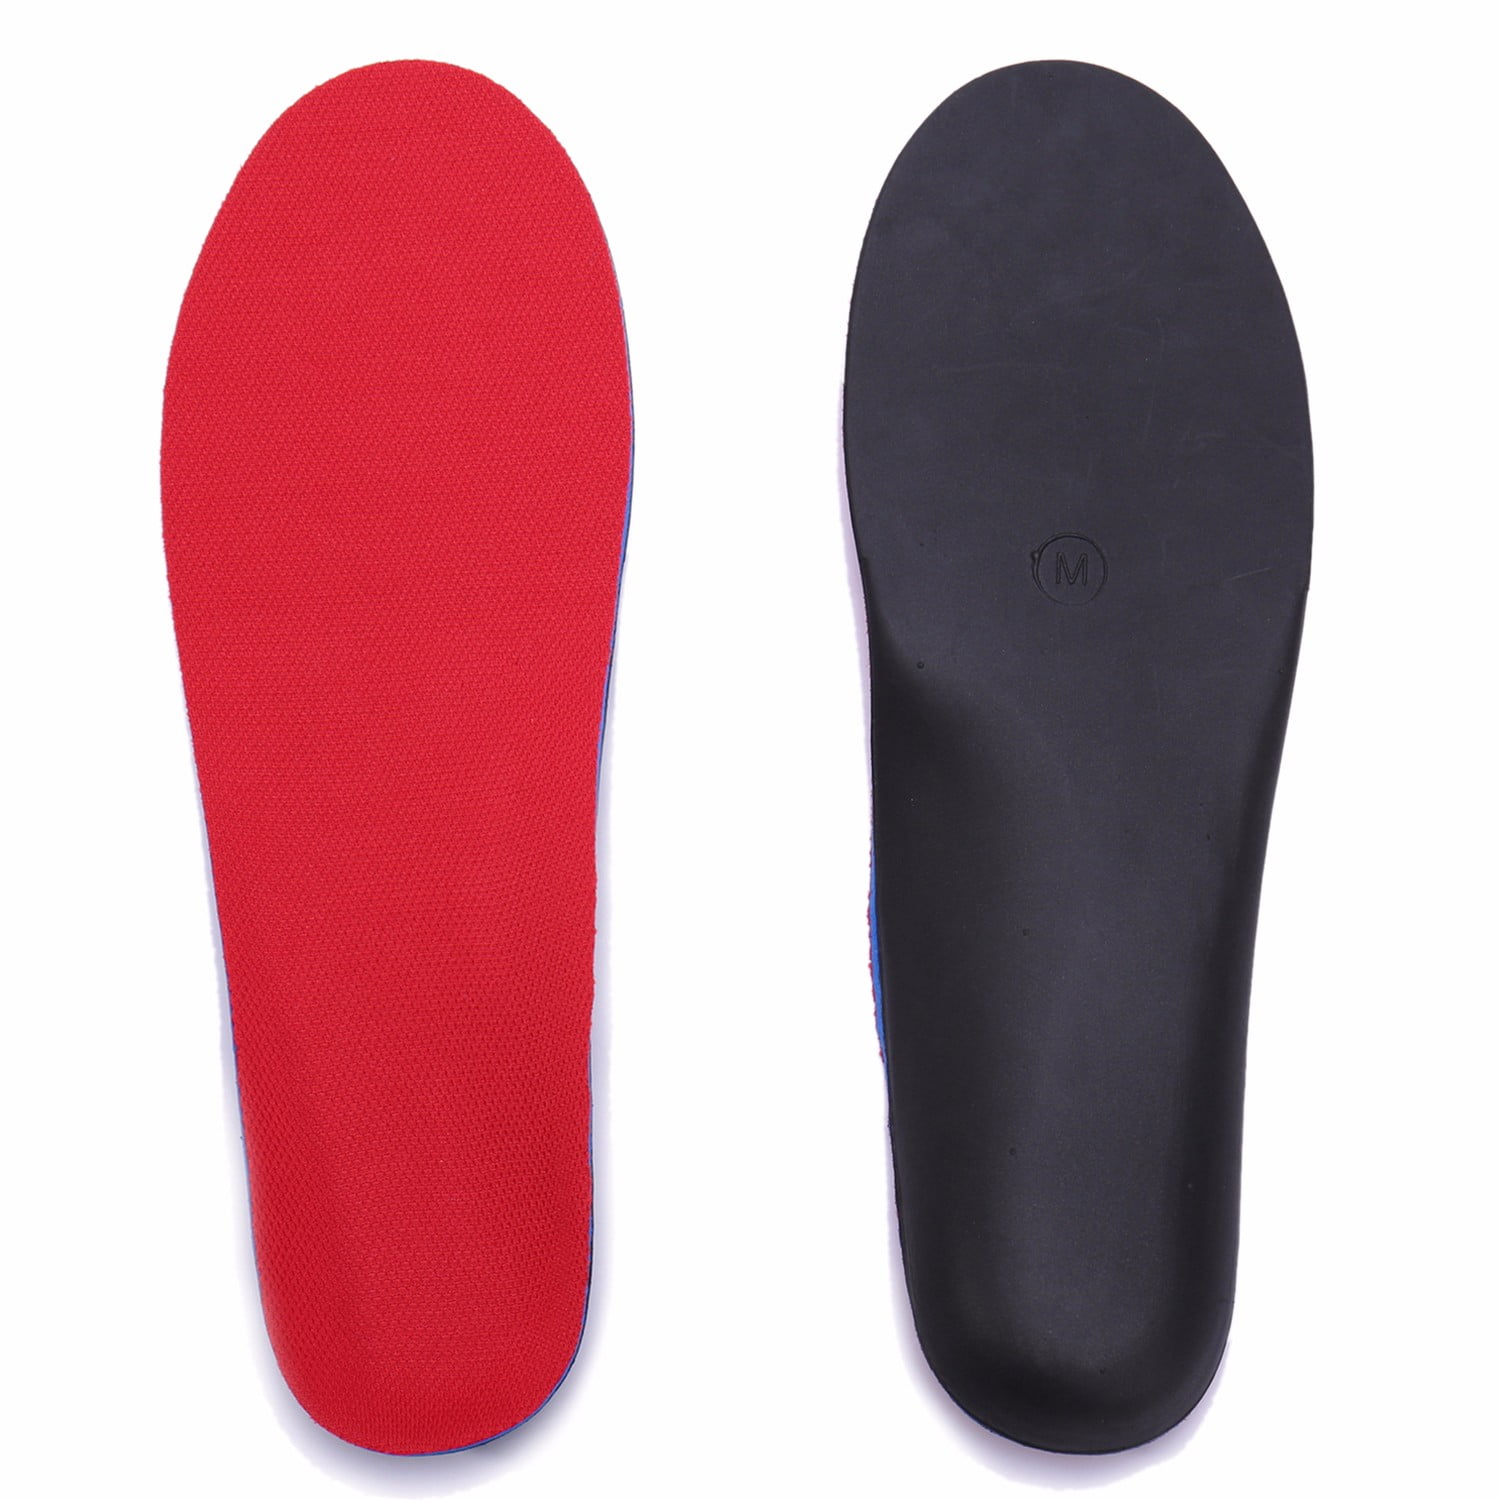 CFR Orthotic Shoes Insoles Inserts Flat Feet High Arch Support Plantar Fasciitis 